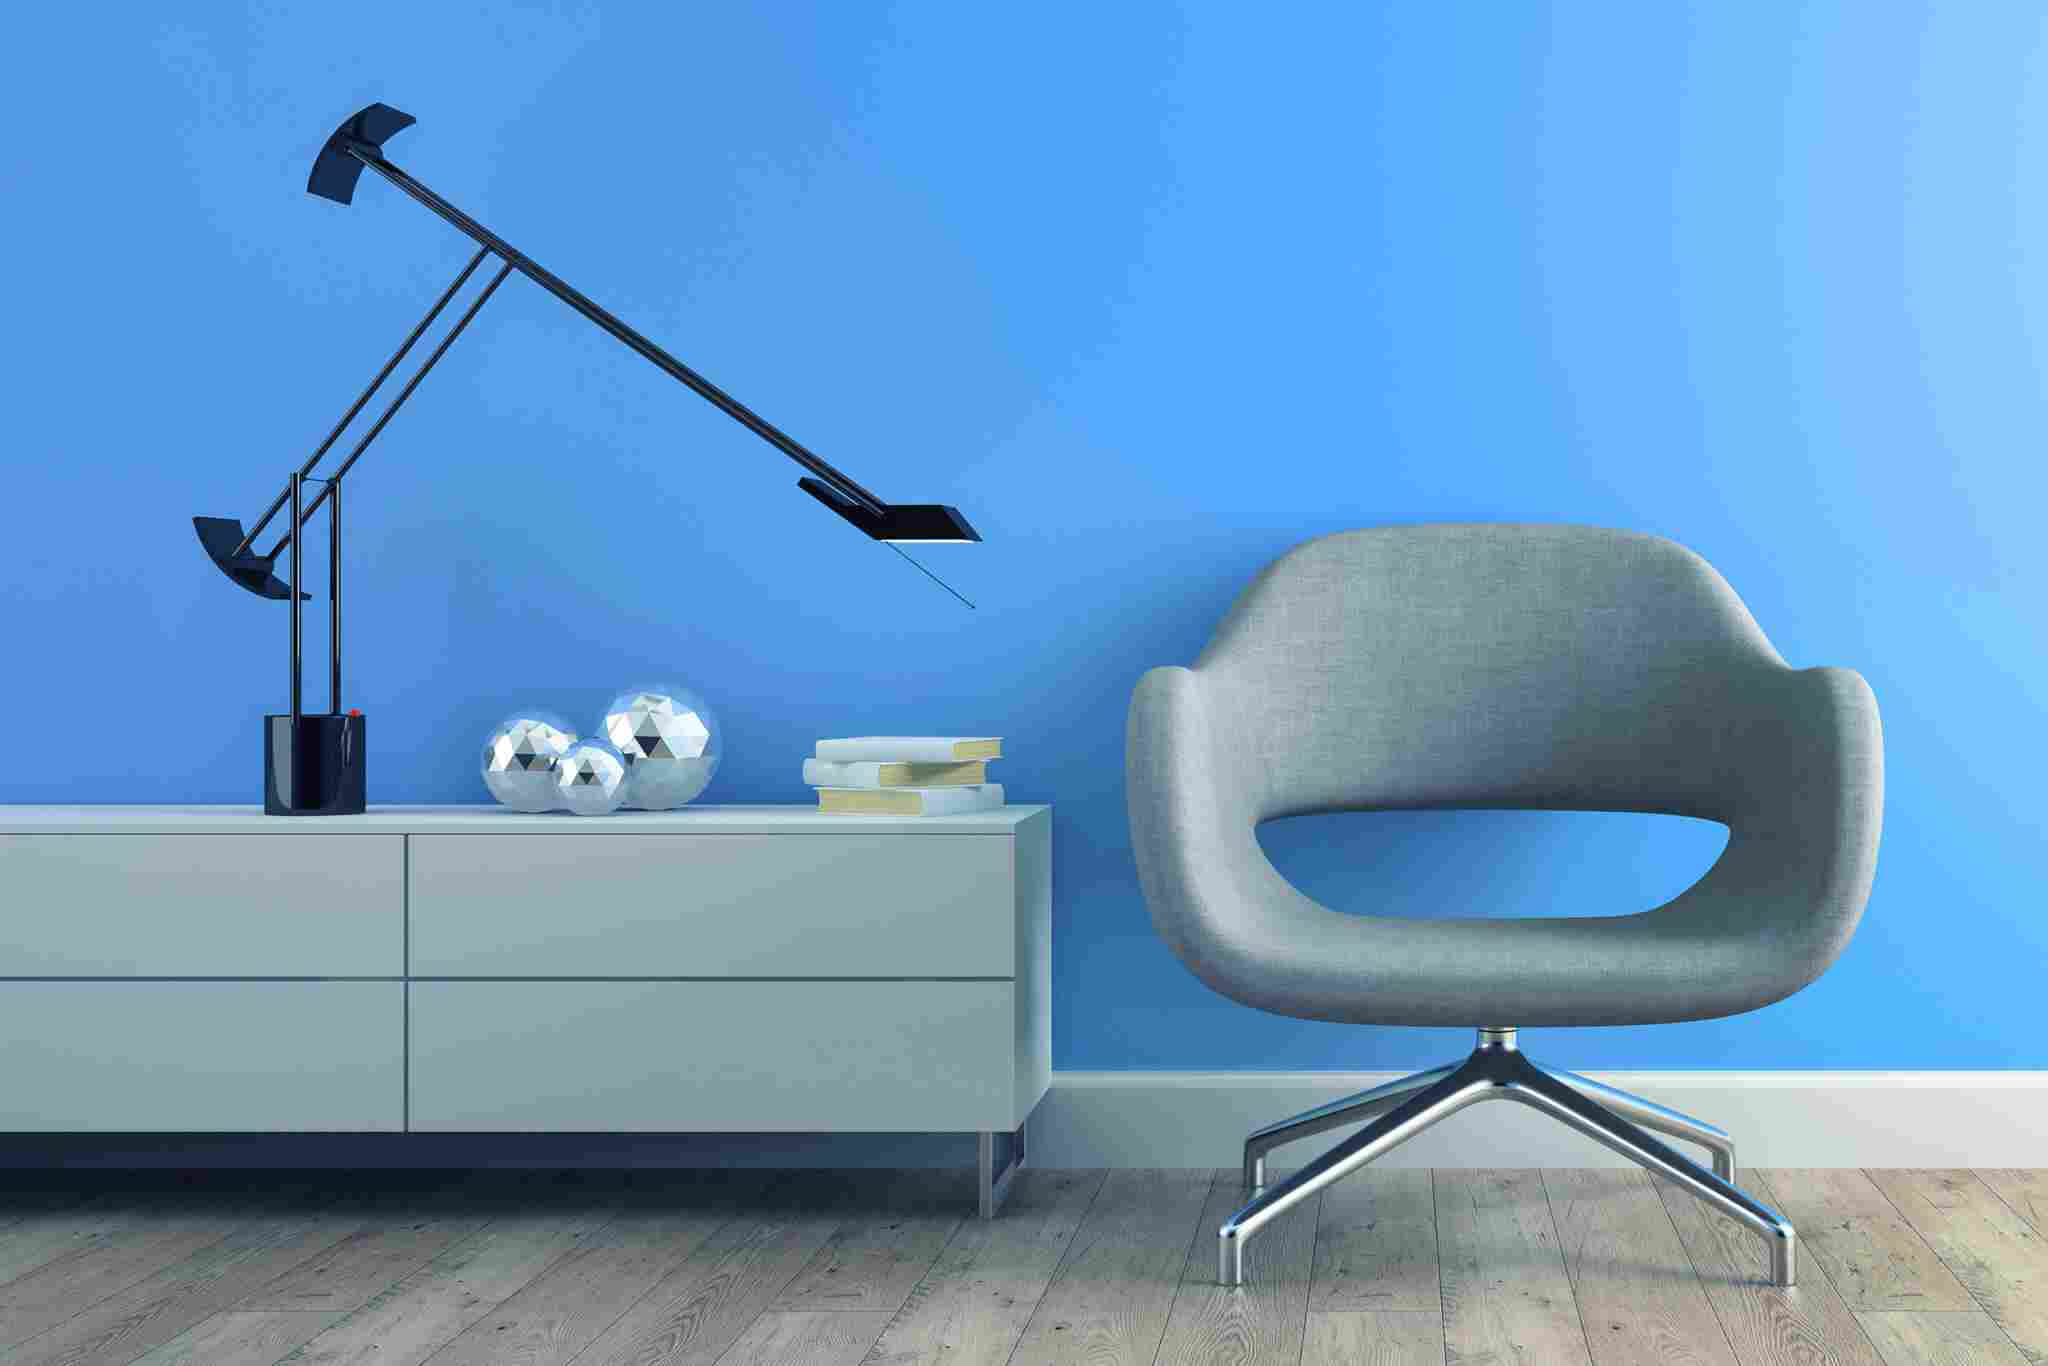 https://www.anikaglobal.in/wp-content/uploads/2017/05/image-chair-blue-wall.jpg